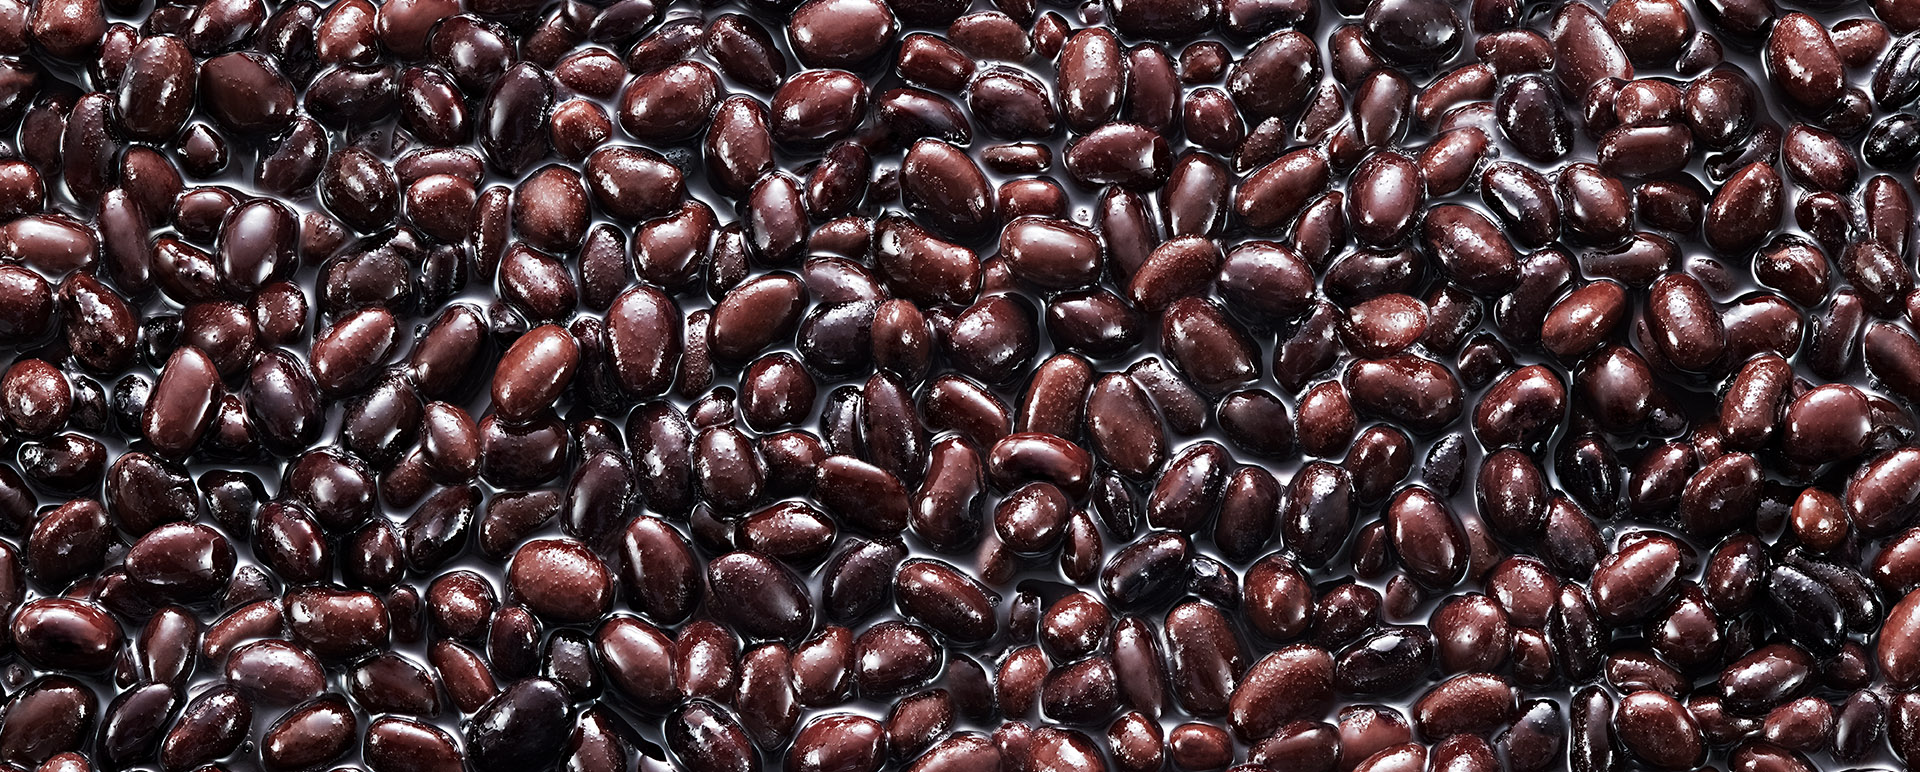 A close-up of a large batch of black beans